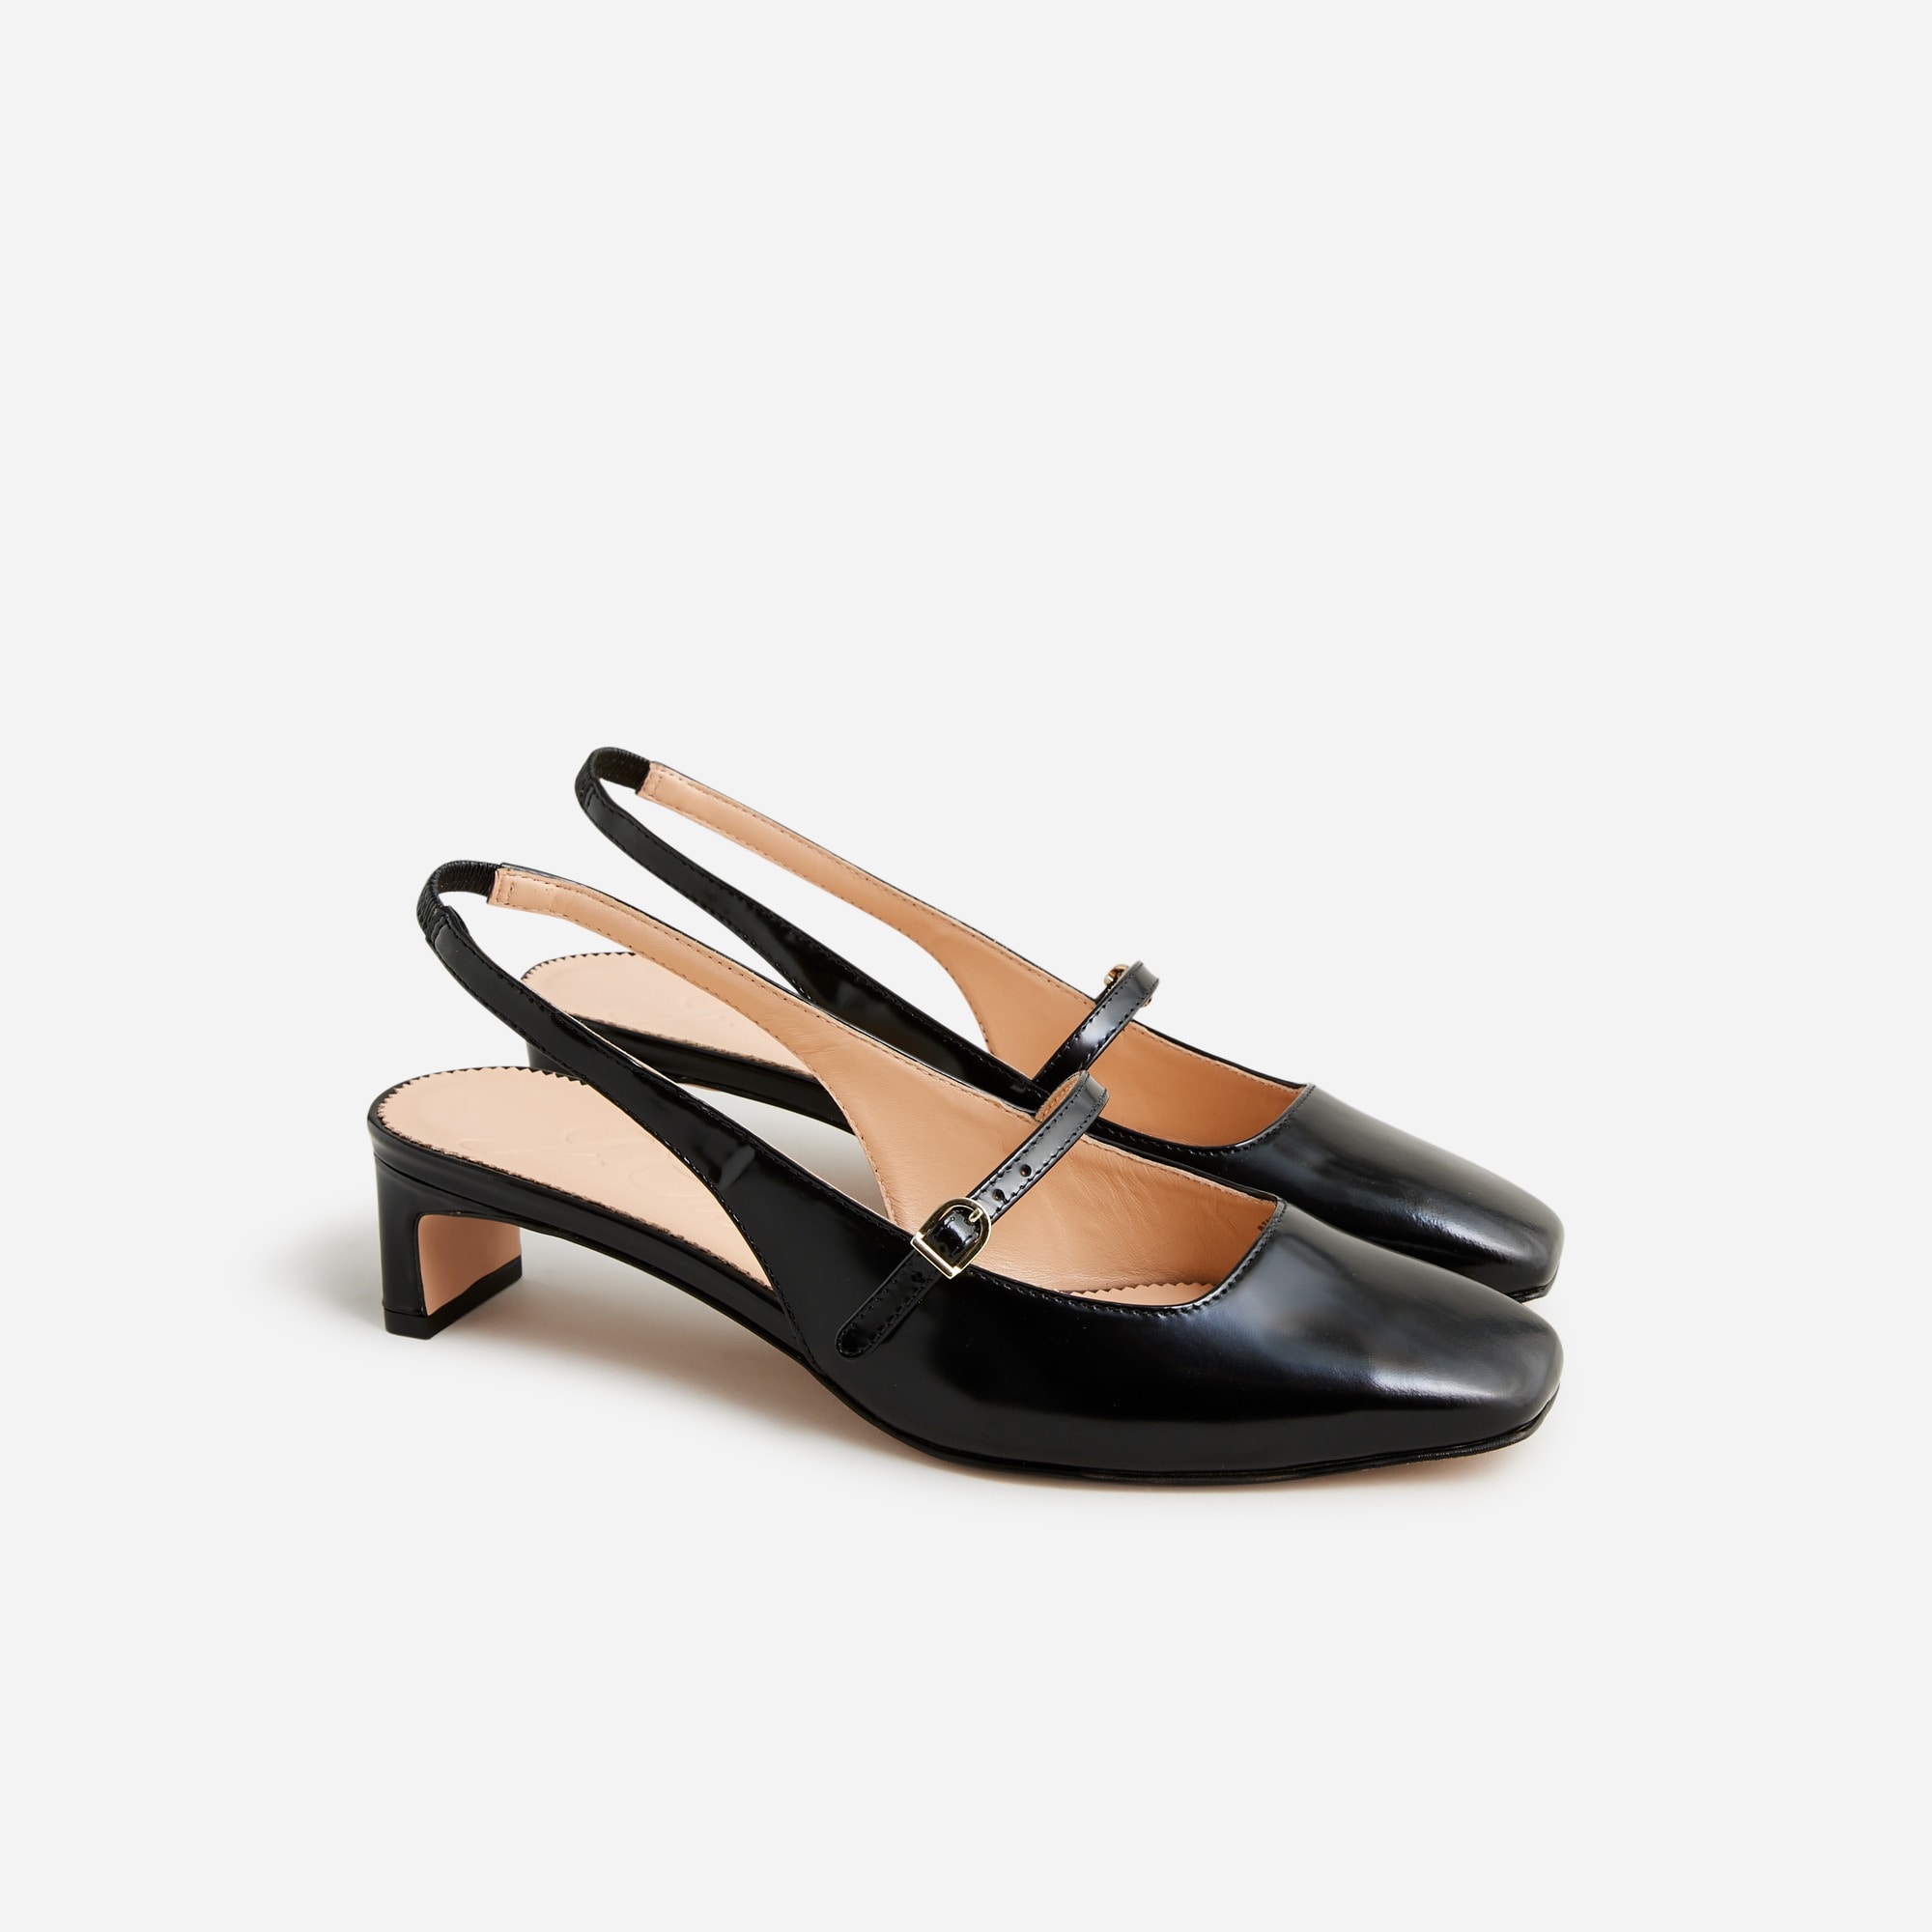 J.Crew: Layla Slingback Mary Jane Heels In Spazzolato Leather For Women